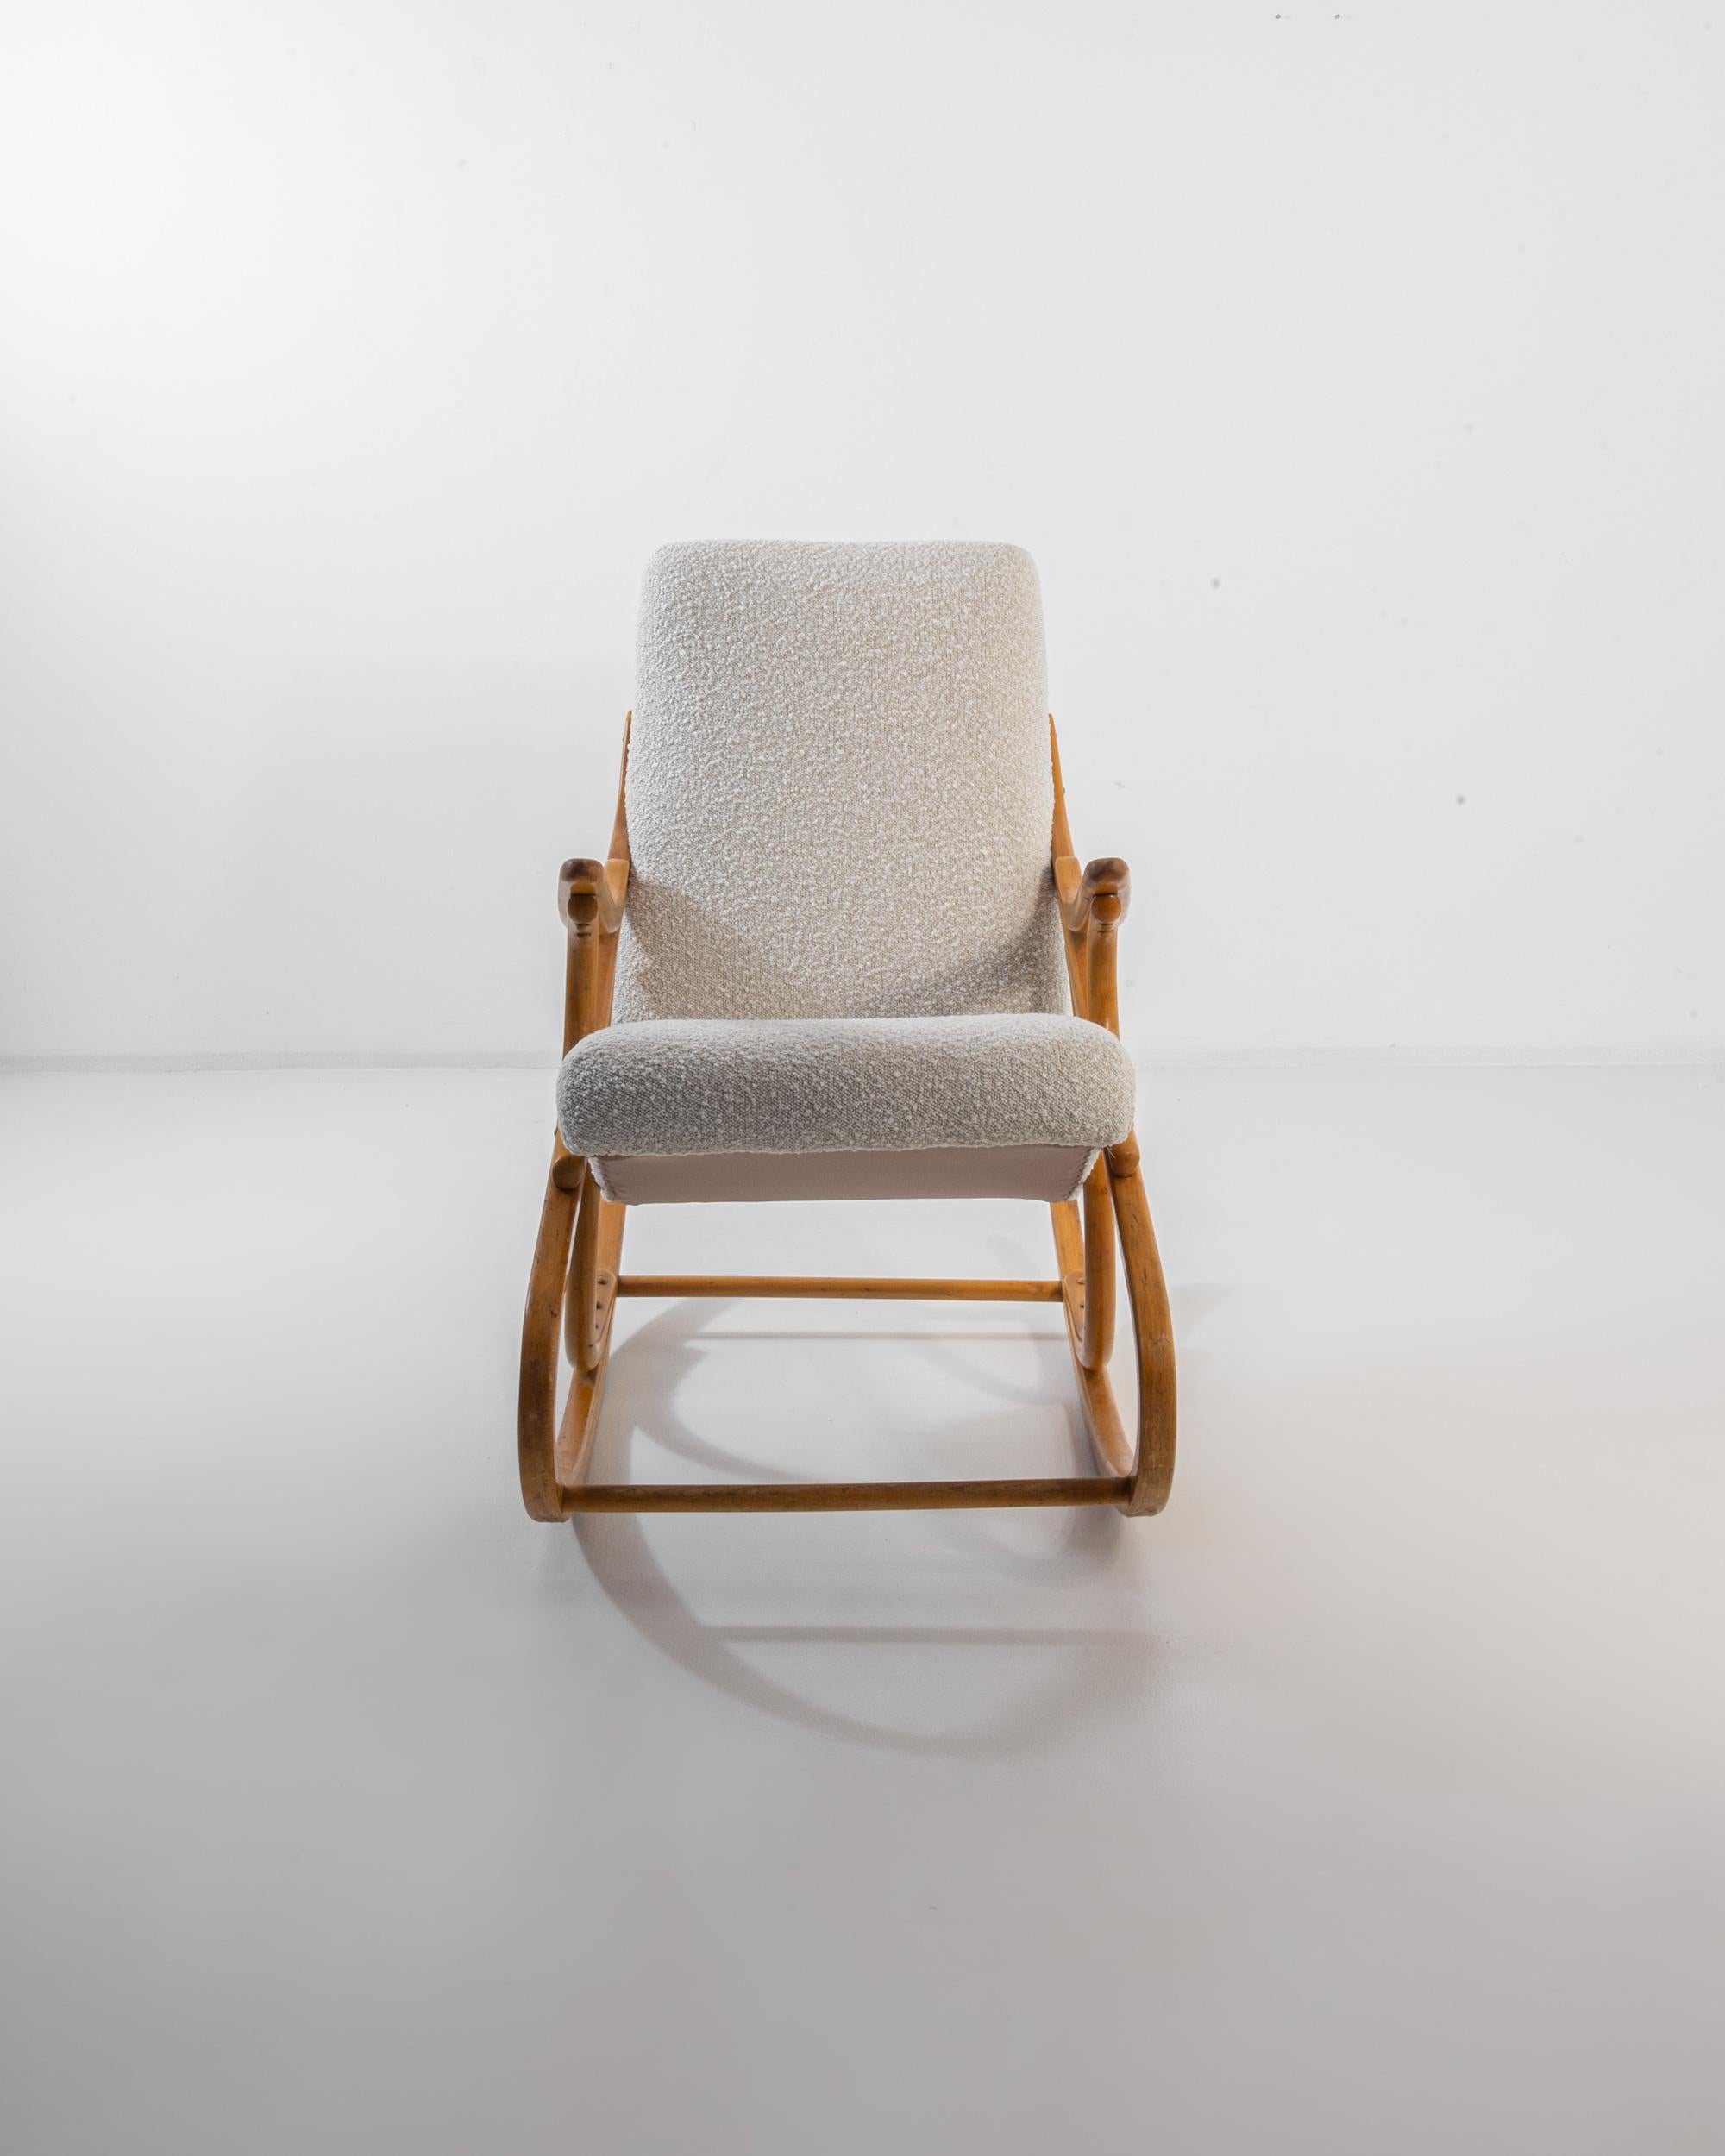 This vintage wooden chair was produced in Czechia, circa 1960. A rocking chair in bentwood, this classic piece was crafted by TON, a furniture company famous in Europe for their steamed wood technique and hand crafted quality since 1861. Bringing